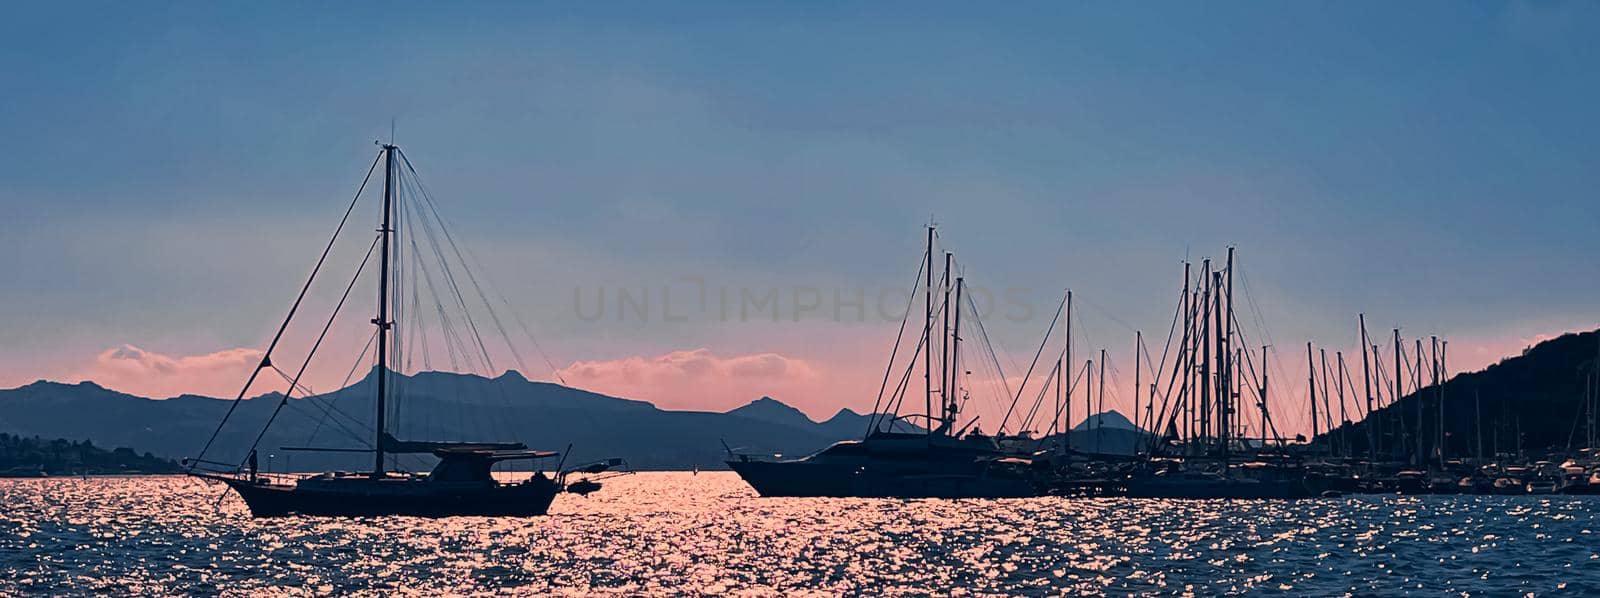 Tranquil seascape and coastal nature concept. Sea, boats, mountains and blue sky over horizon at sunset by Anneleven